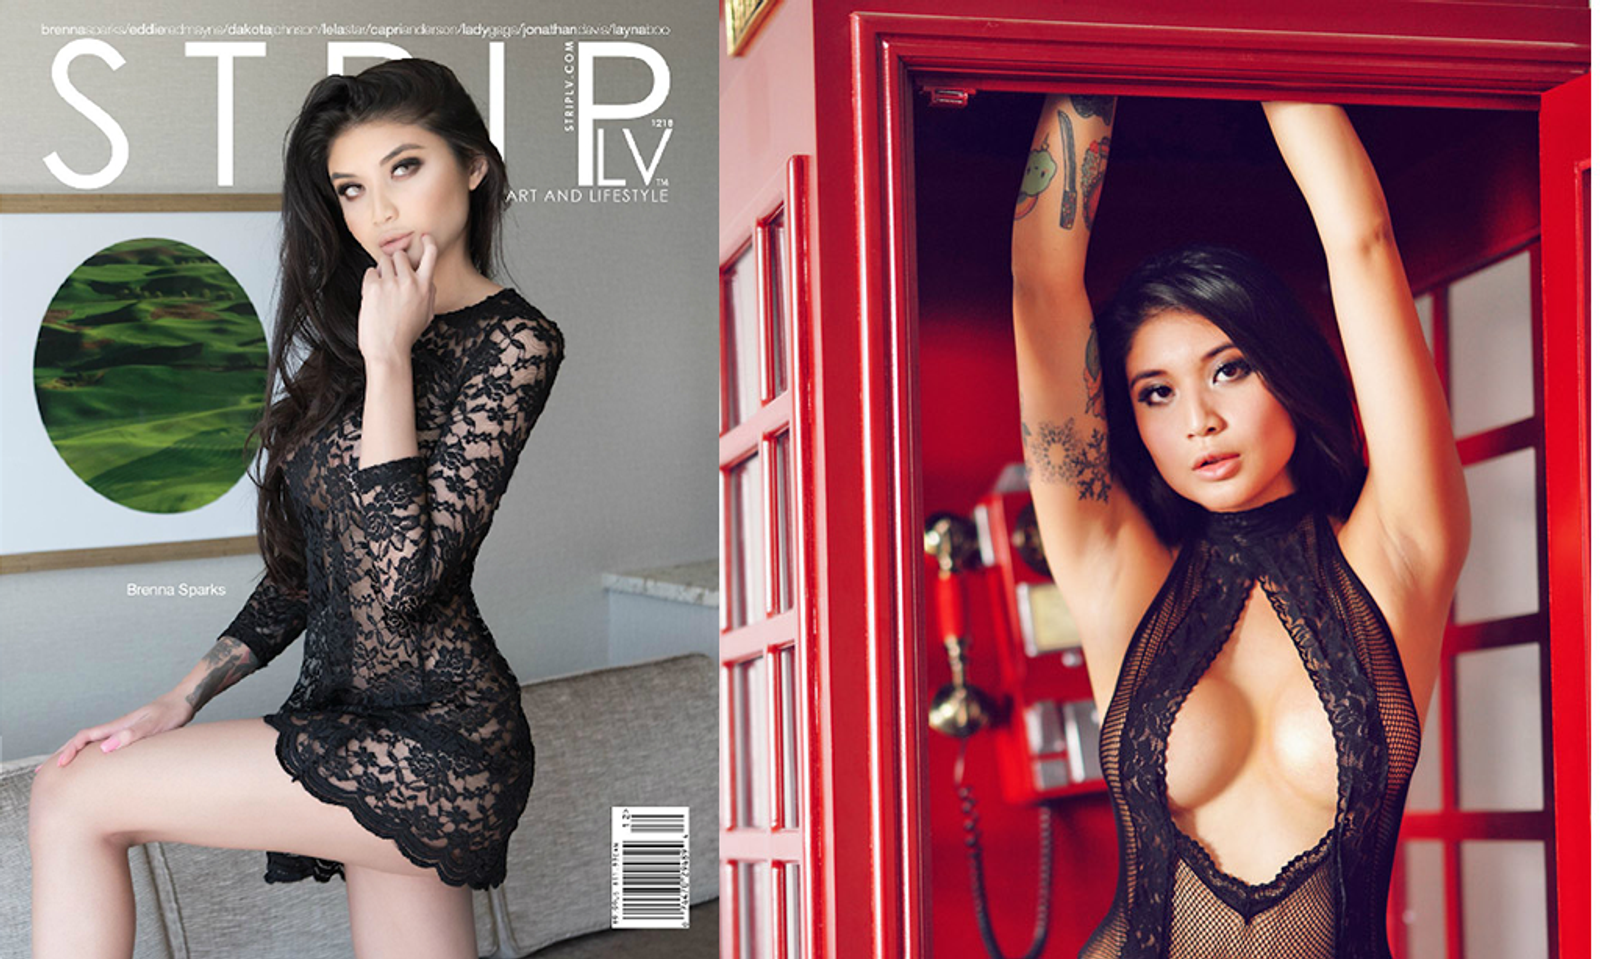 Brenna Sparks Featured On Cover & In Photo Spread in StripLV Mag